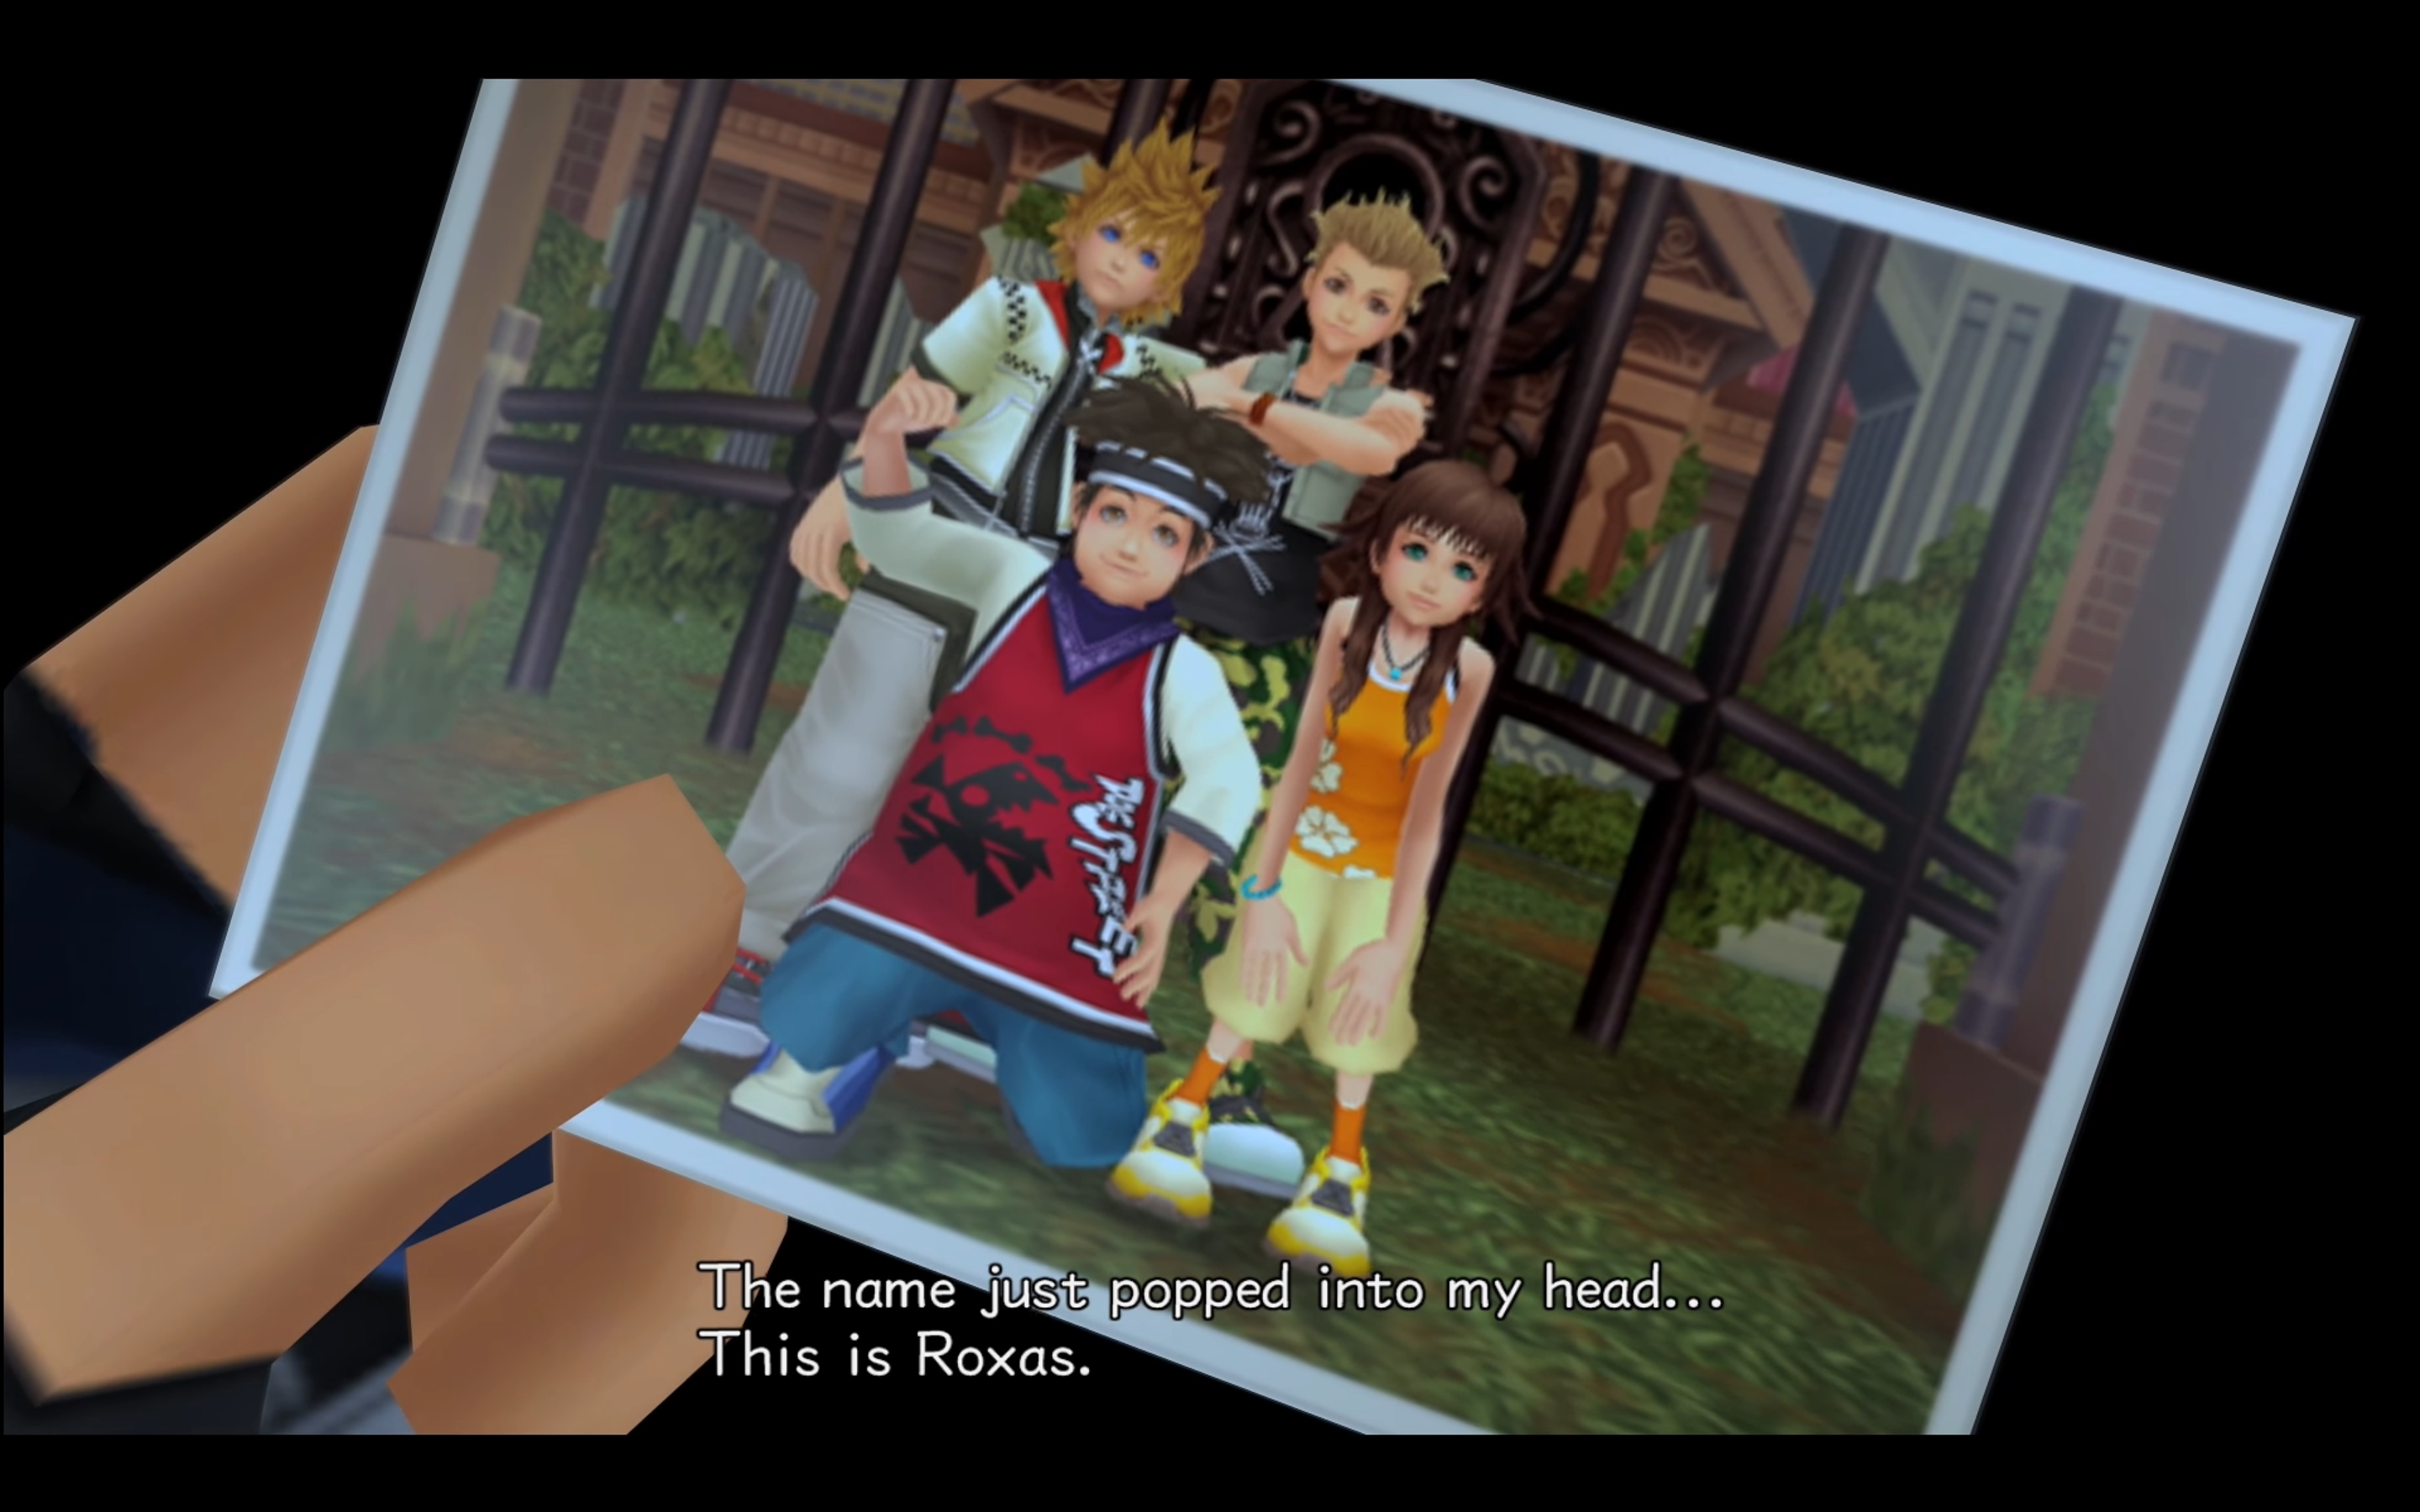 "Kingdom Hearts II." Square Enix. 2007.
Photo of Hayner, Pence, and Olette with Roxas.